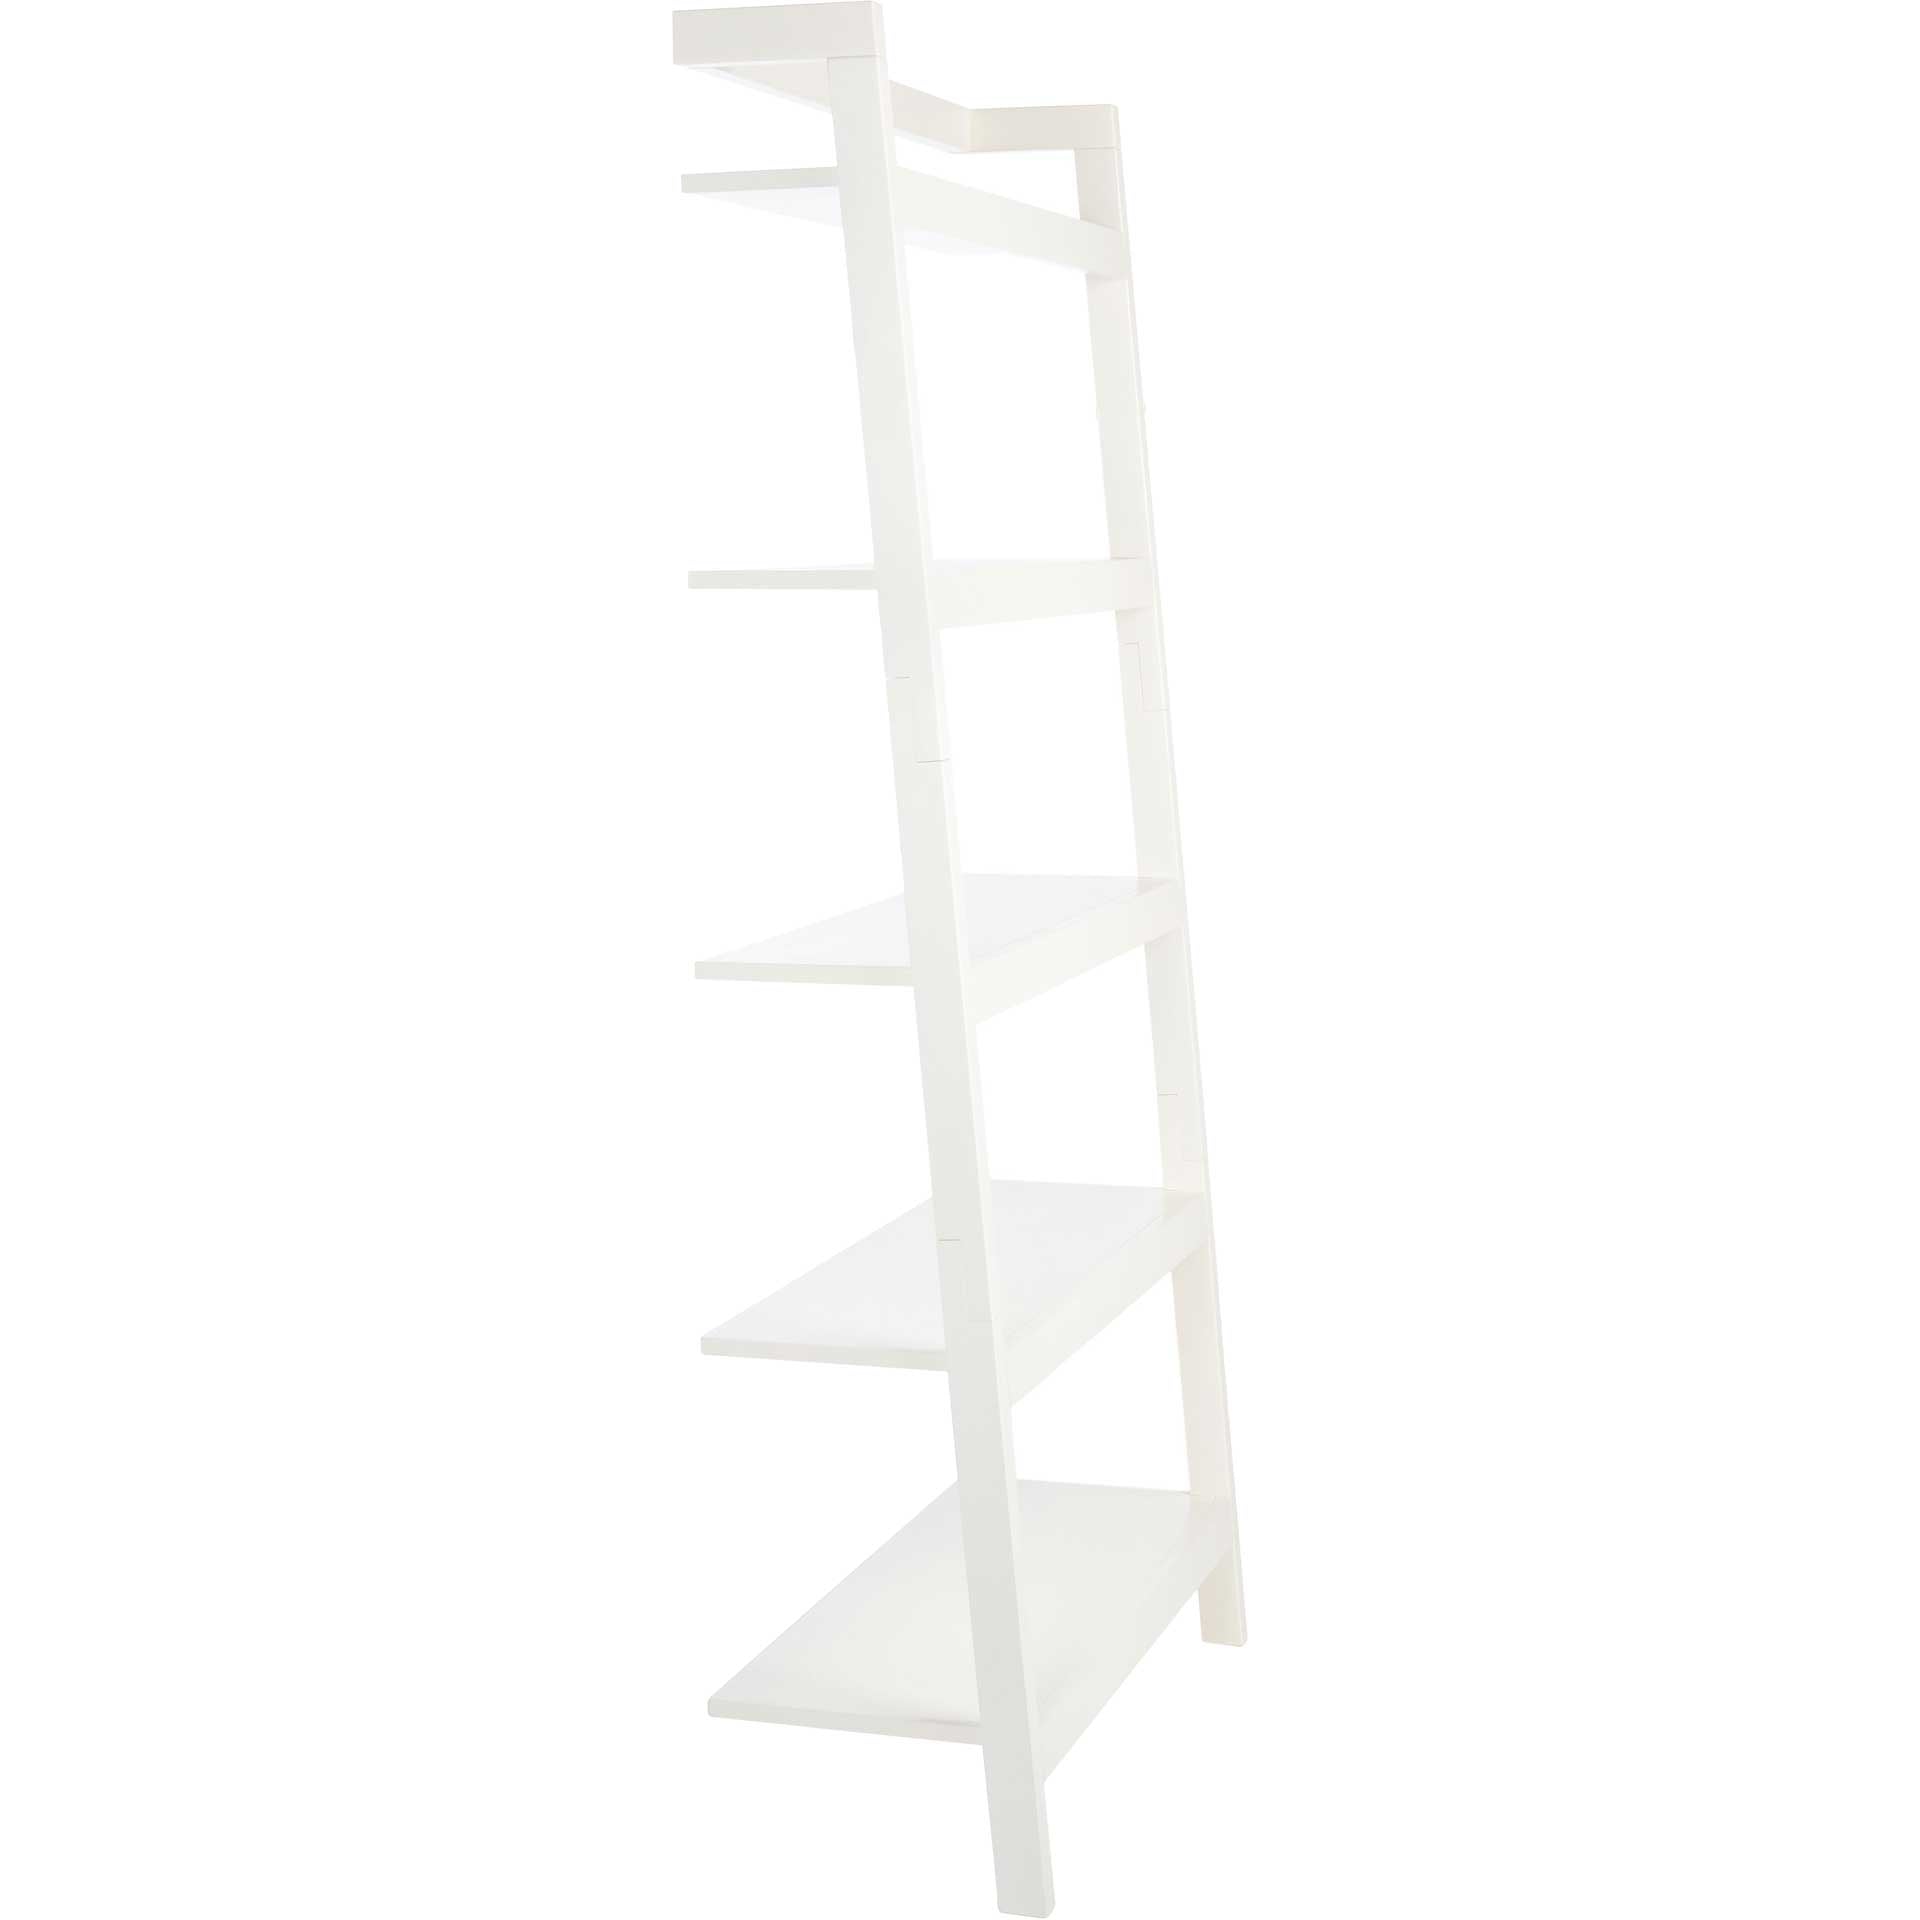 Belami 5 Tier Leaning Etagere White